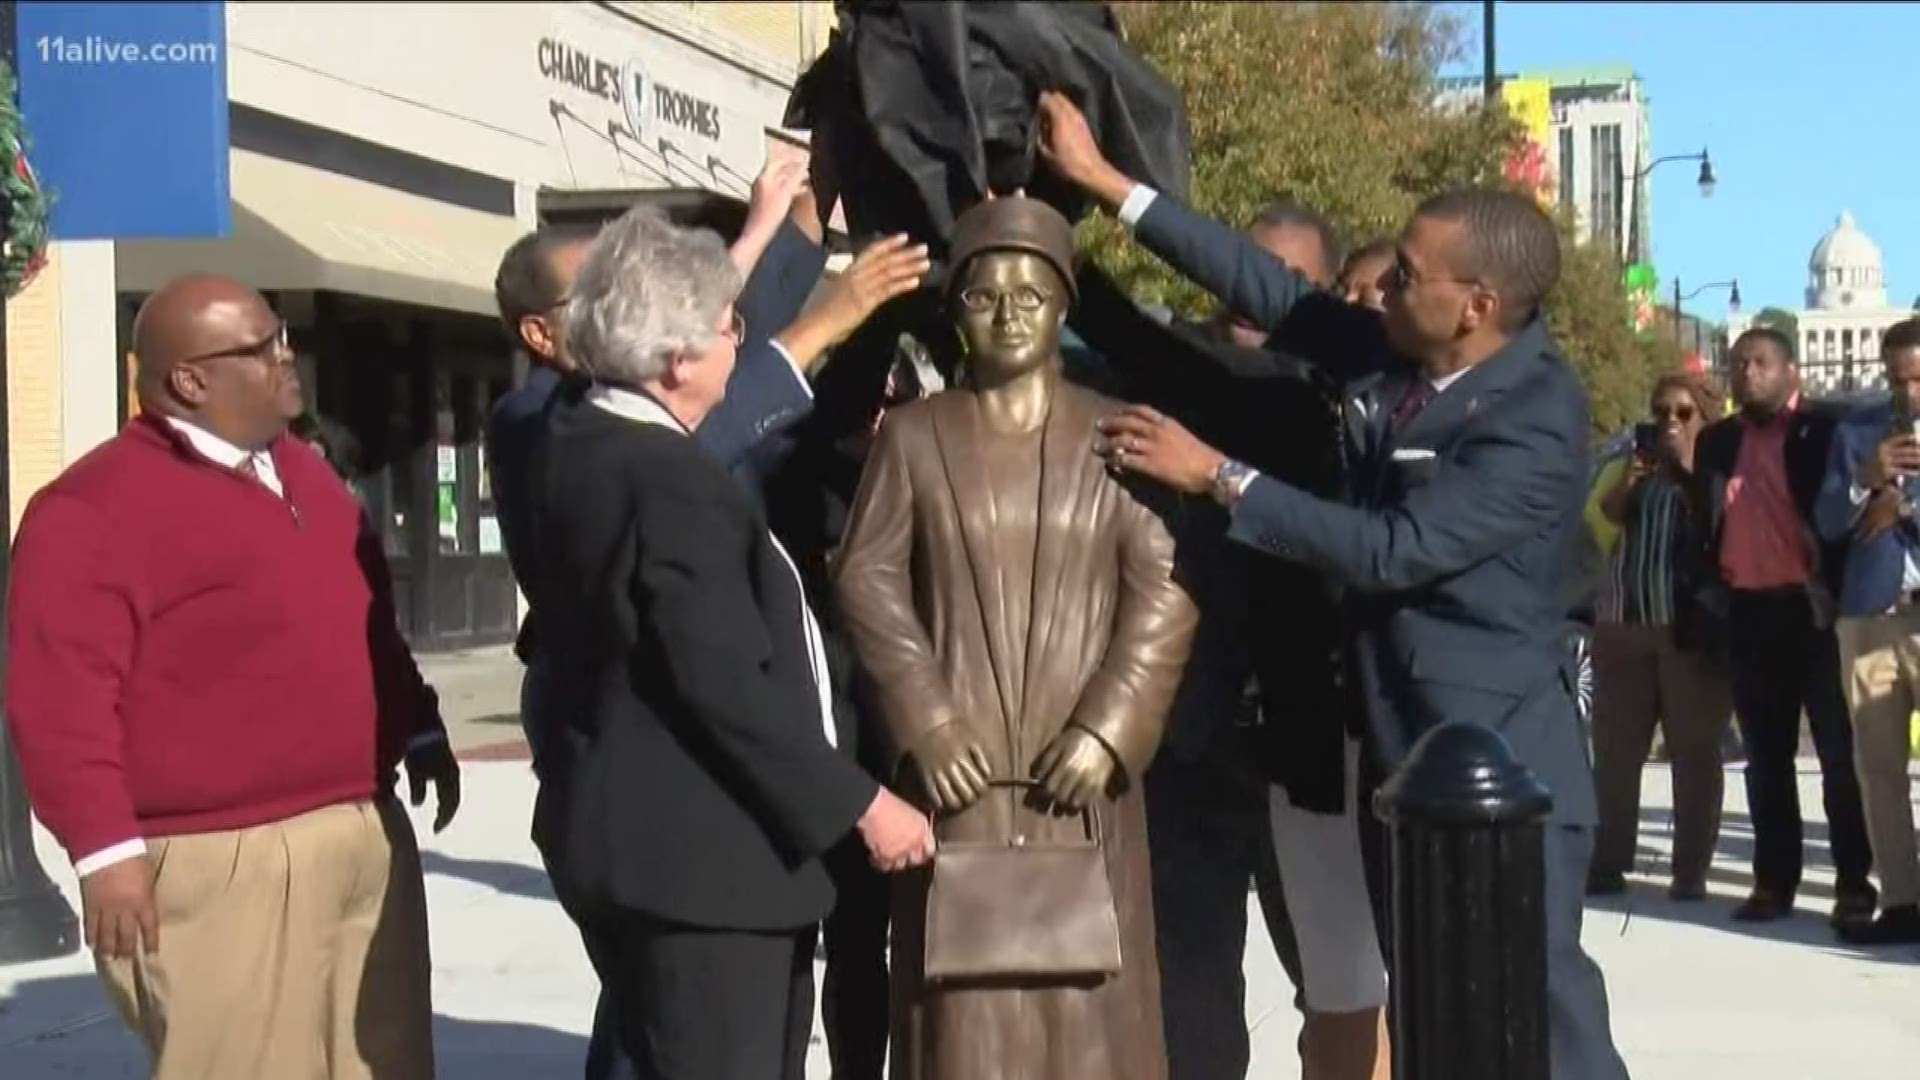 A statue of Rosa Parks was dedicated in Alabama’s capital Sunday, the 64th anniversary of her historic refusal to give up her seat on a public bus to a white man.